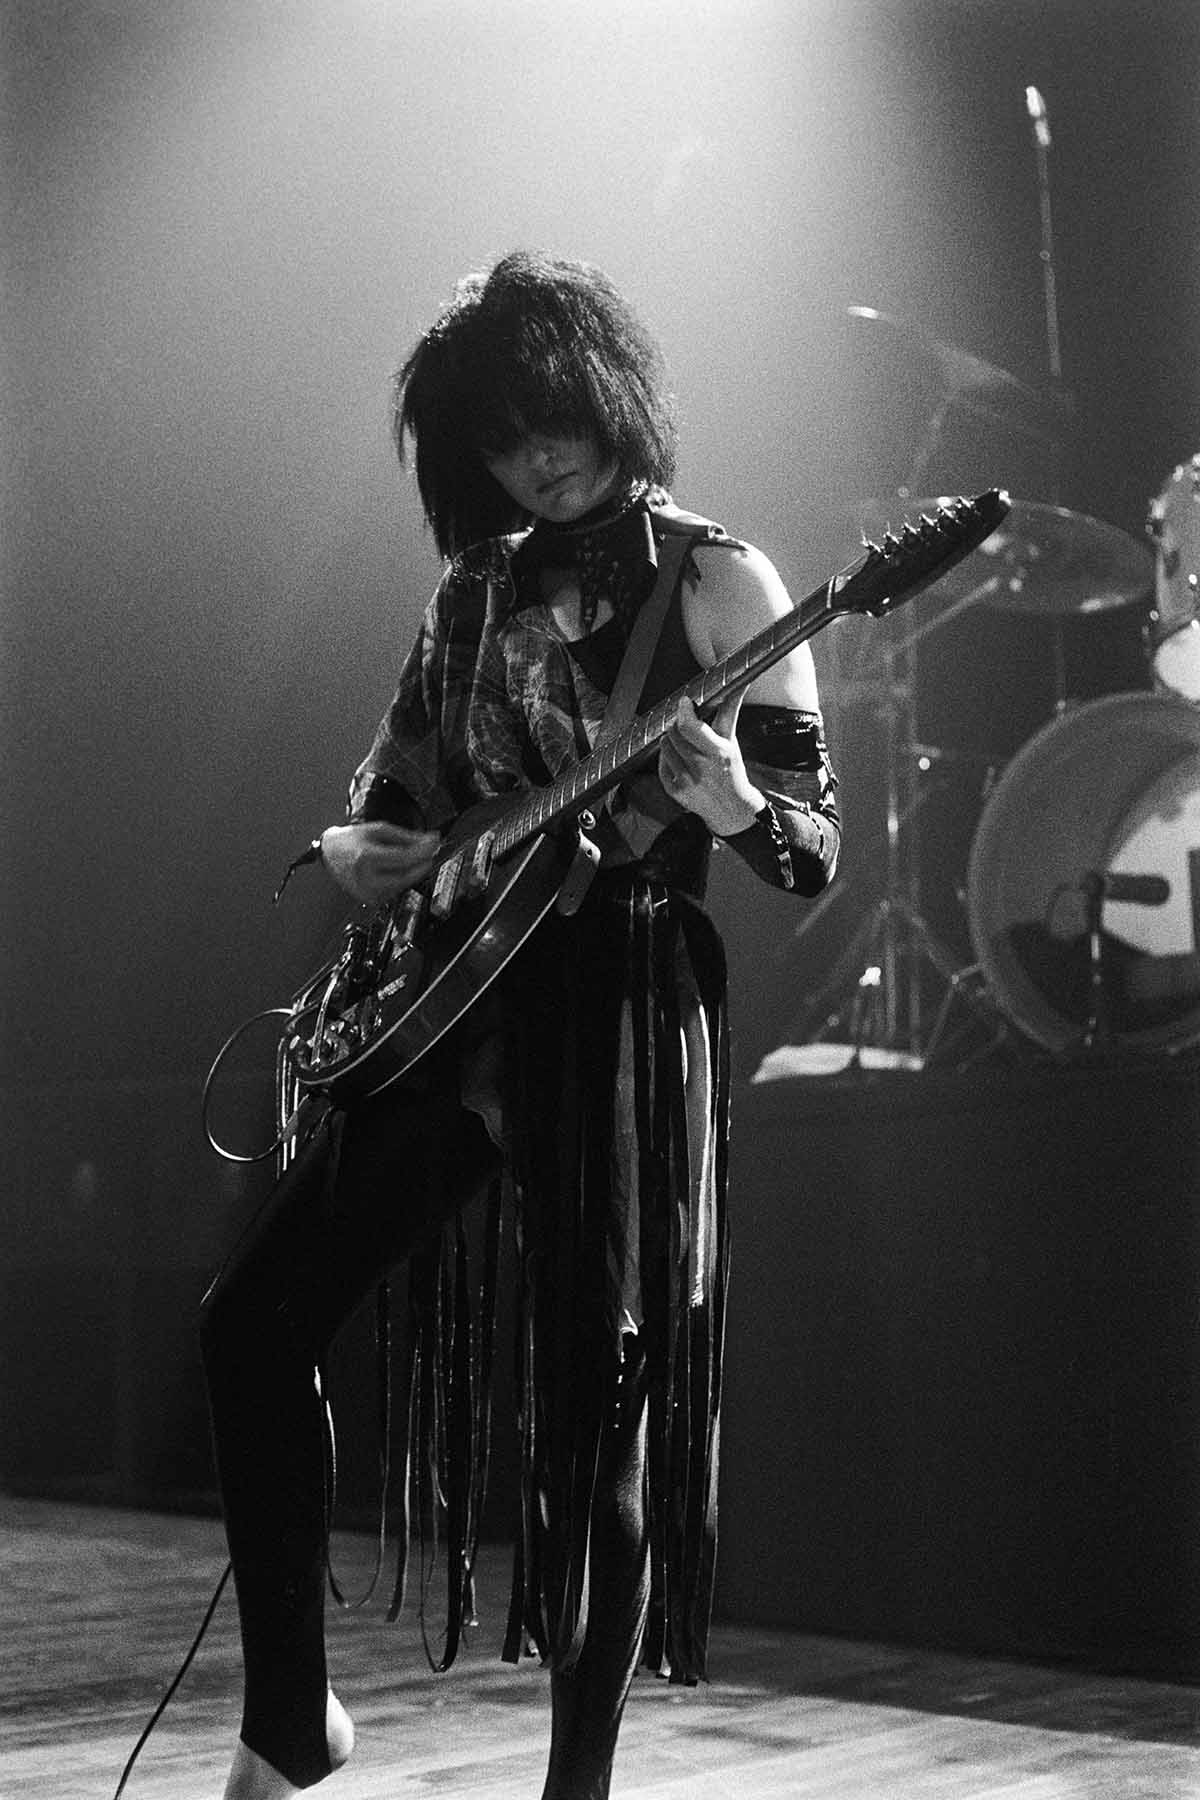 Live photos of experimental New Wave, Noise, Post-Punk, Industrial en Avantgarde bands inge-bekkers-photography-siouxsie-and-the-banshees-pandora-music-box-1983-live-alternative-bands-0332-fotografie